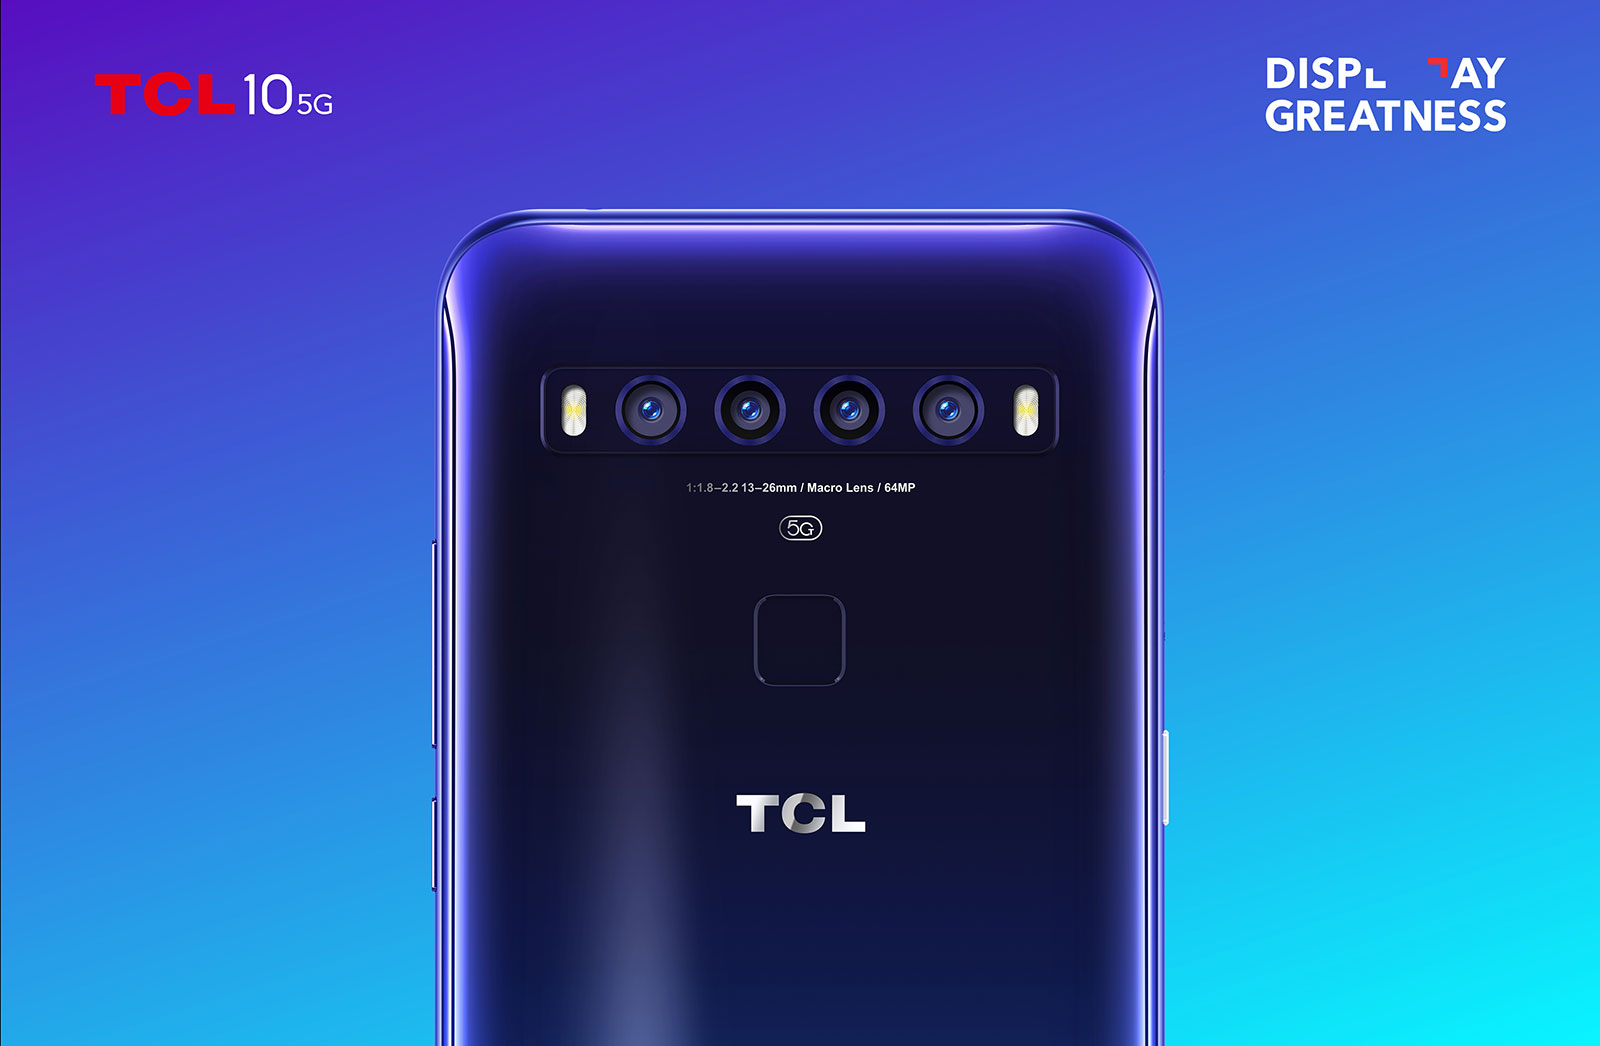 TCL 10 5G WIND revealed